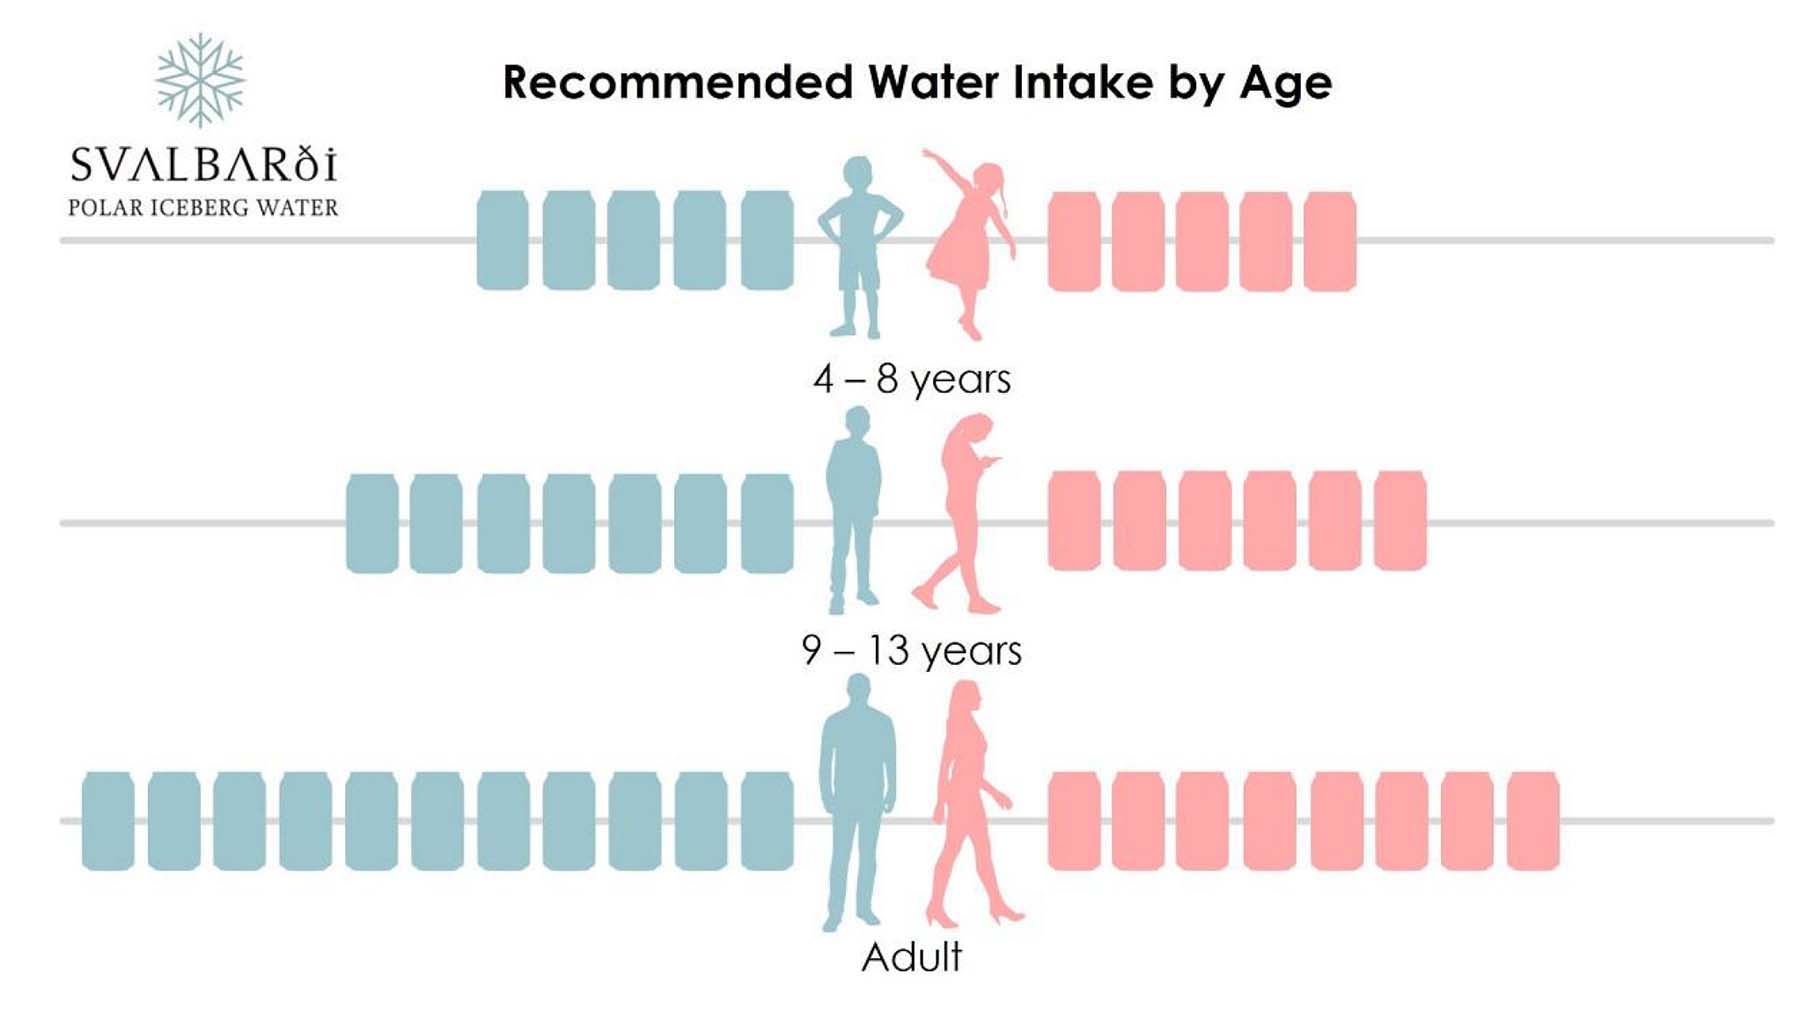 Suggested Daily Water Intake by Age